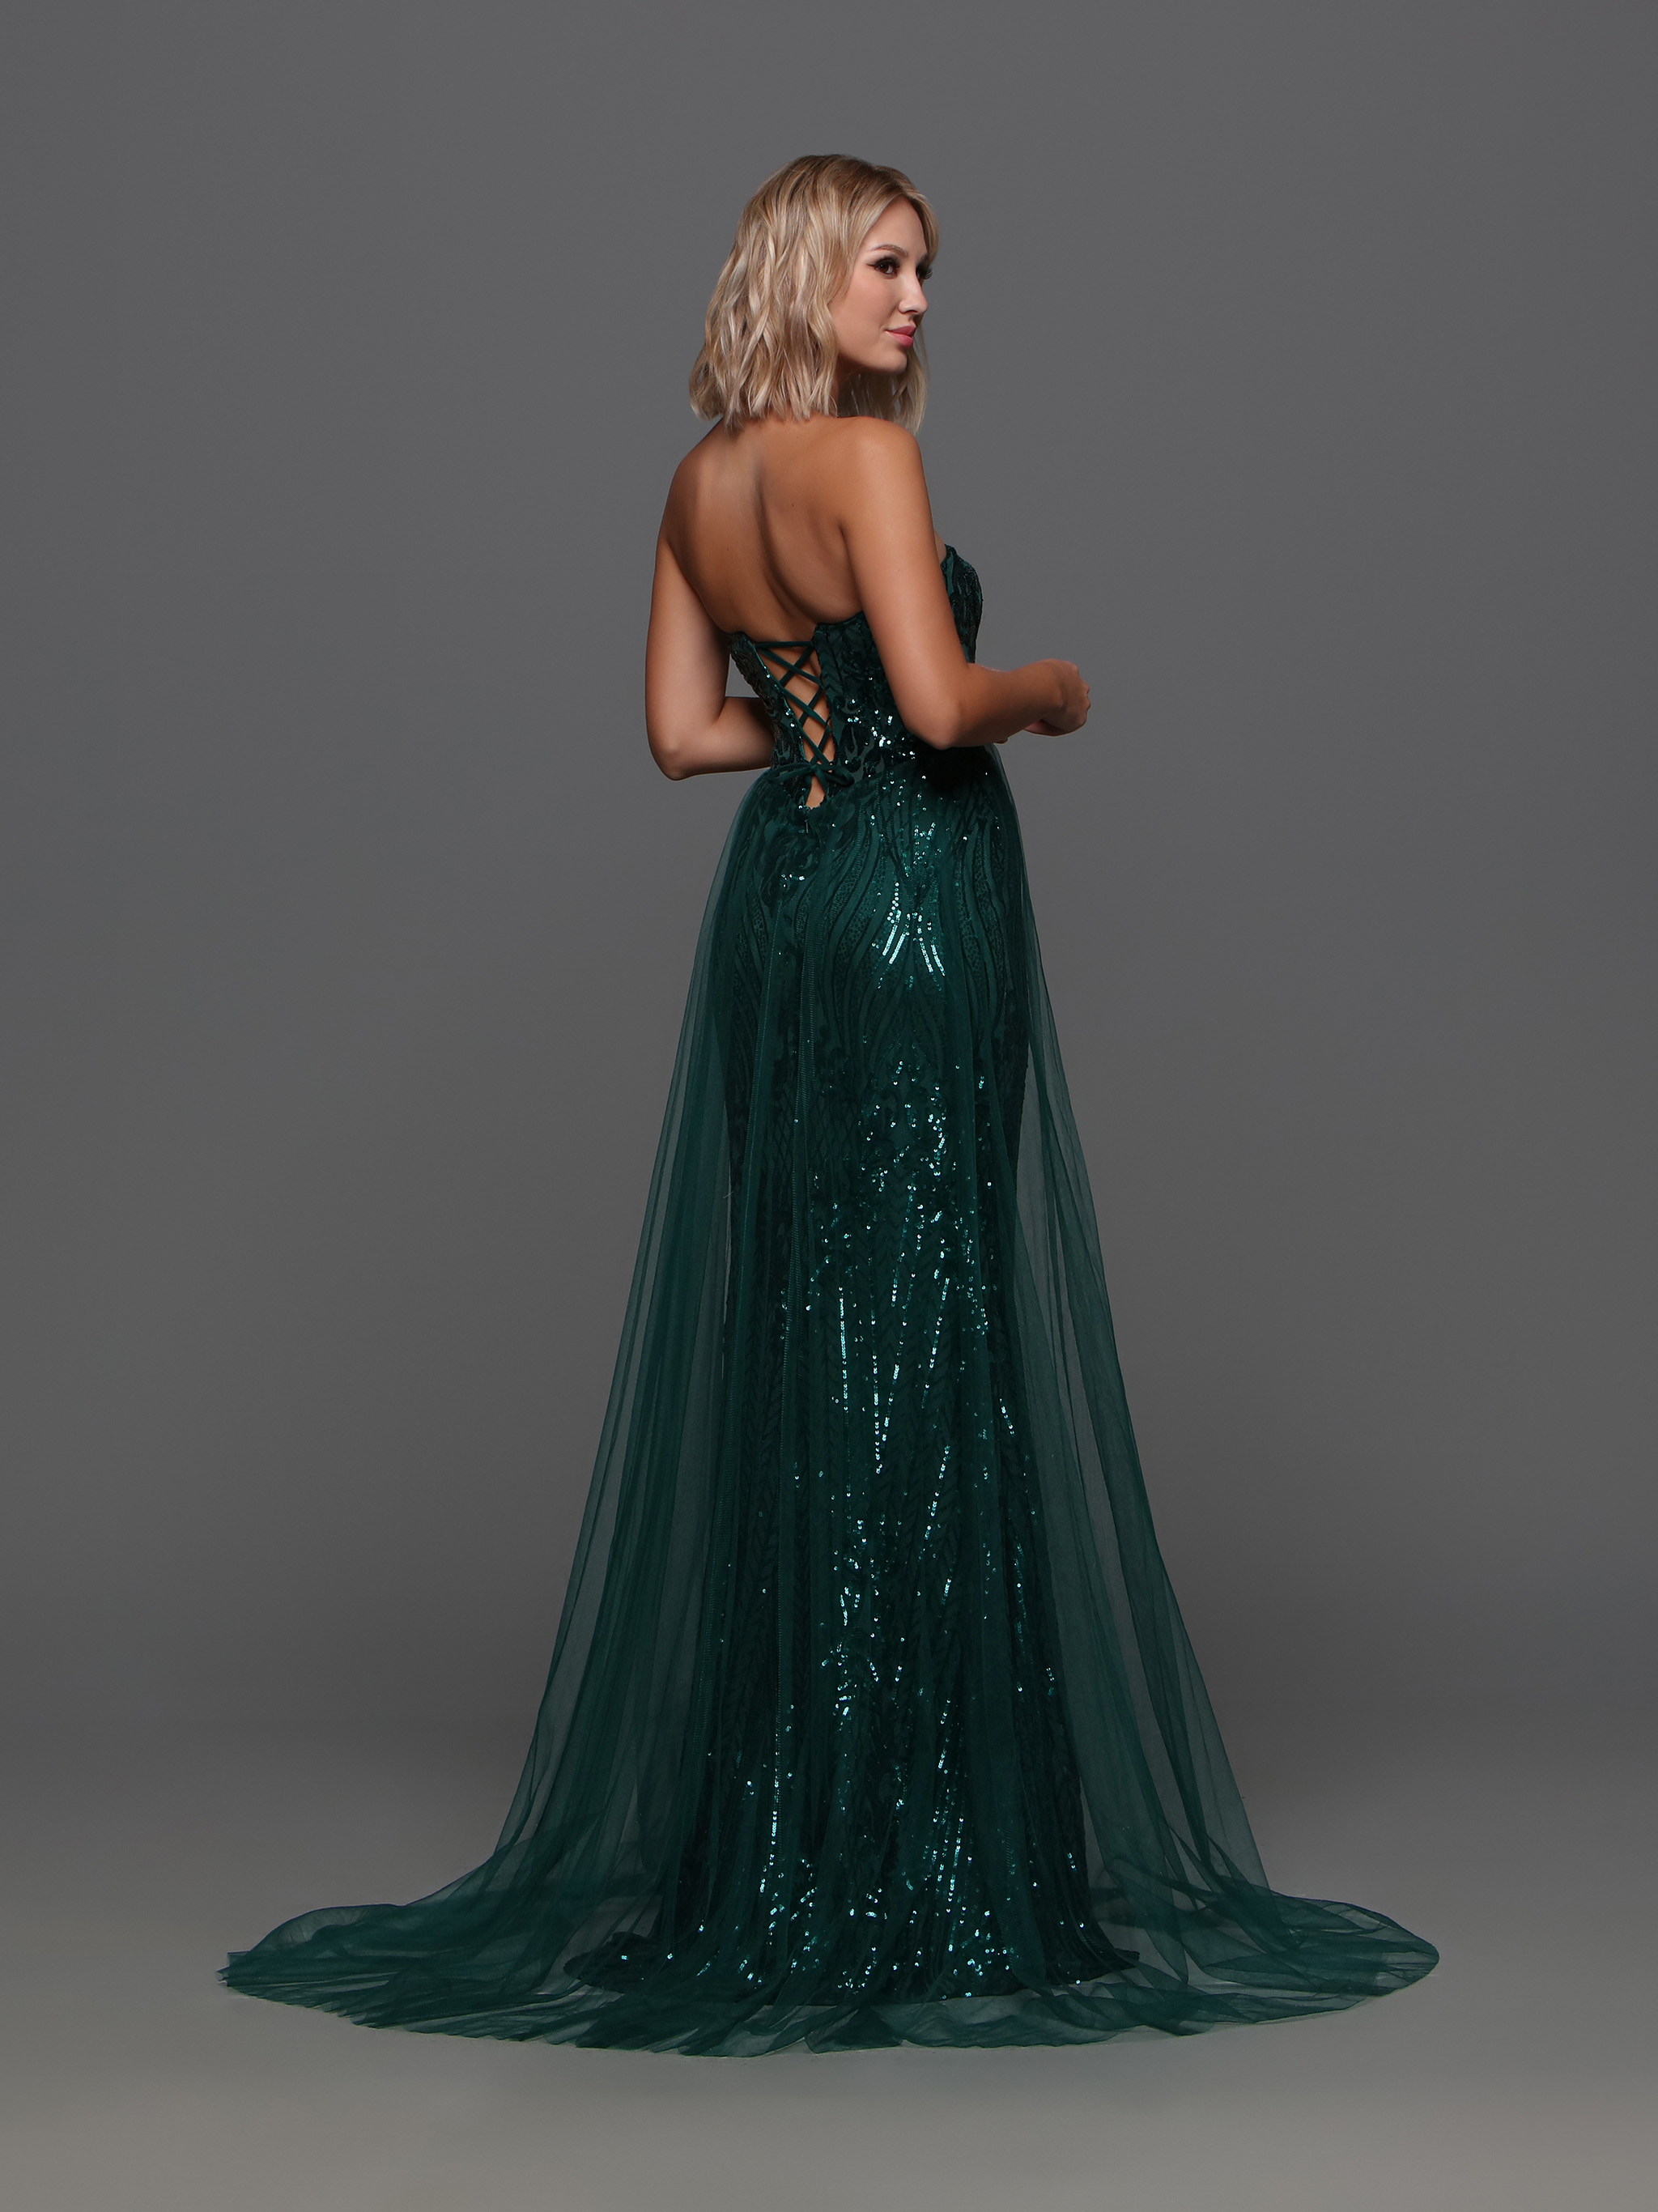 Image showing back view of style #72354